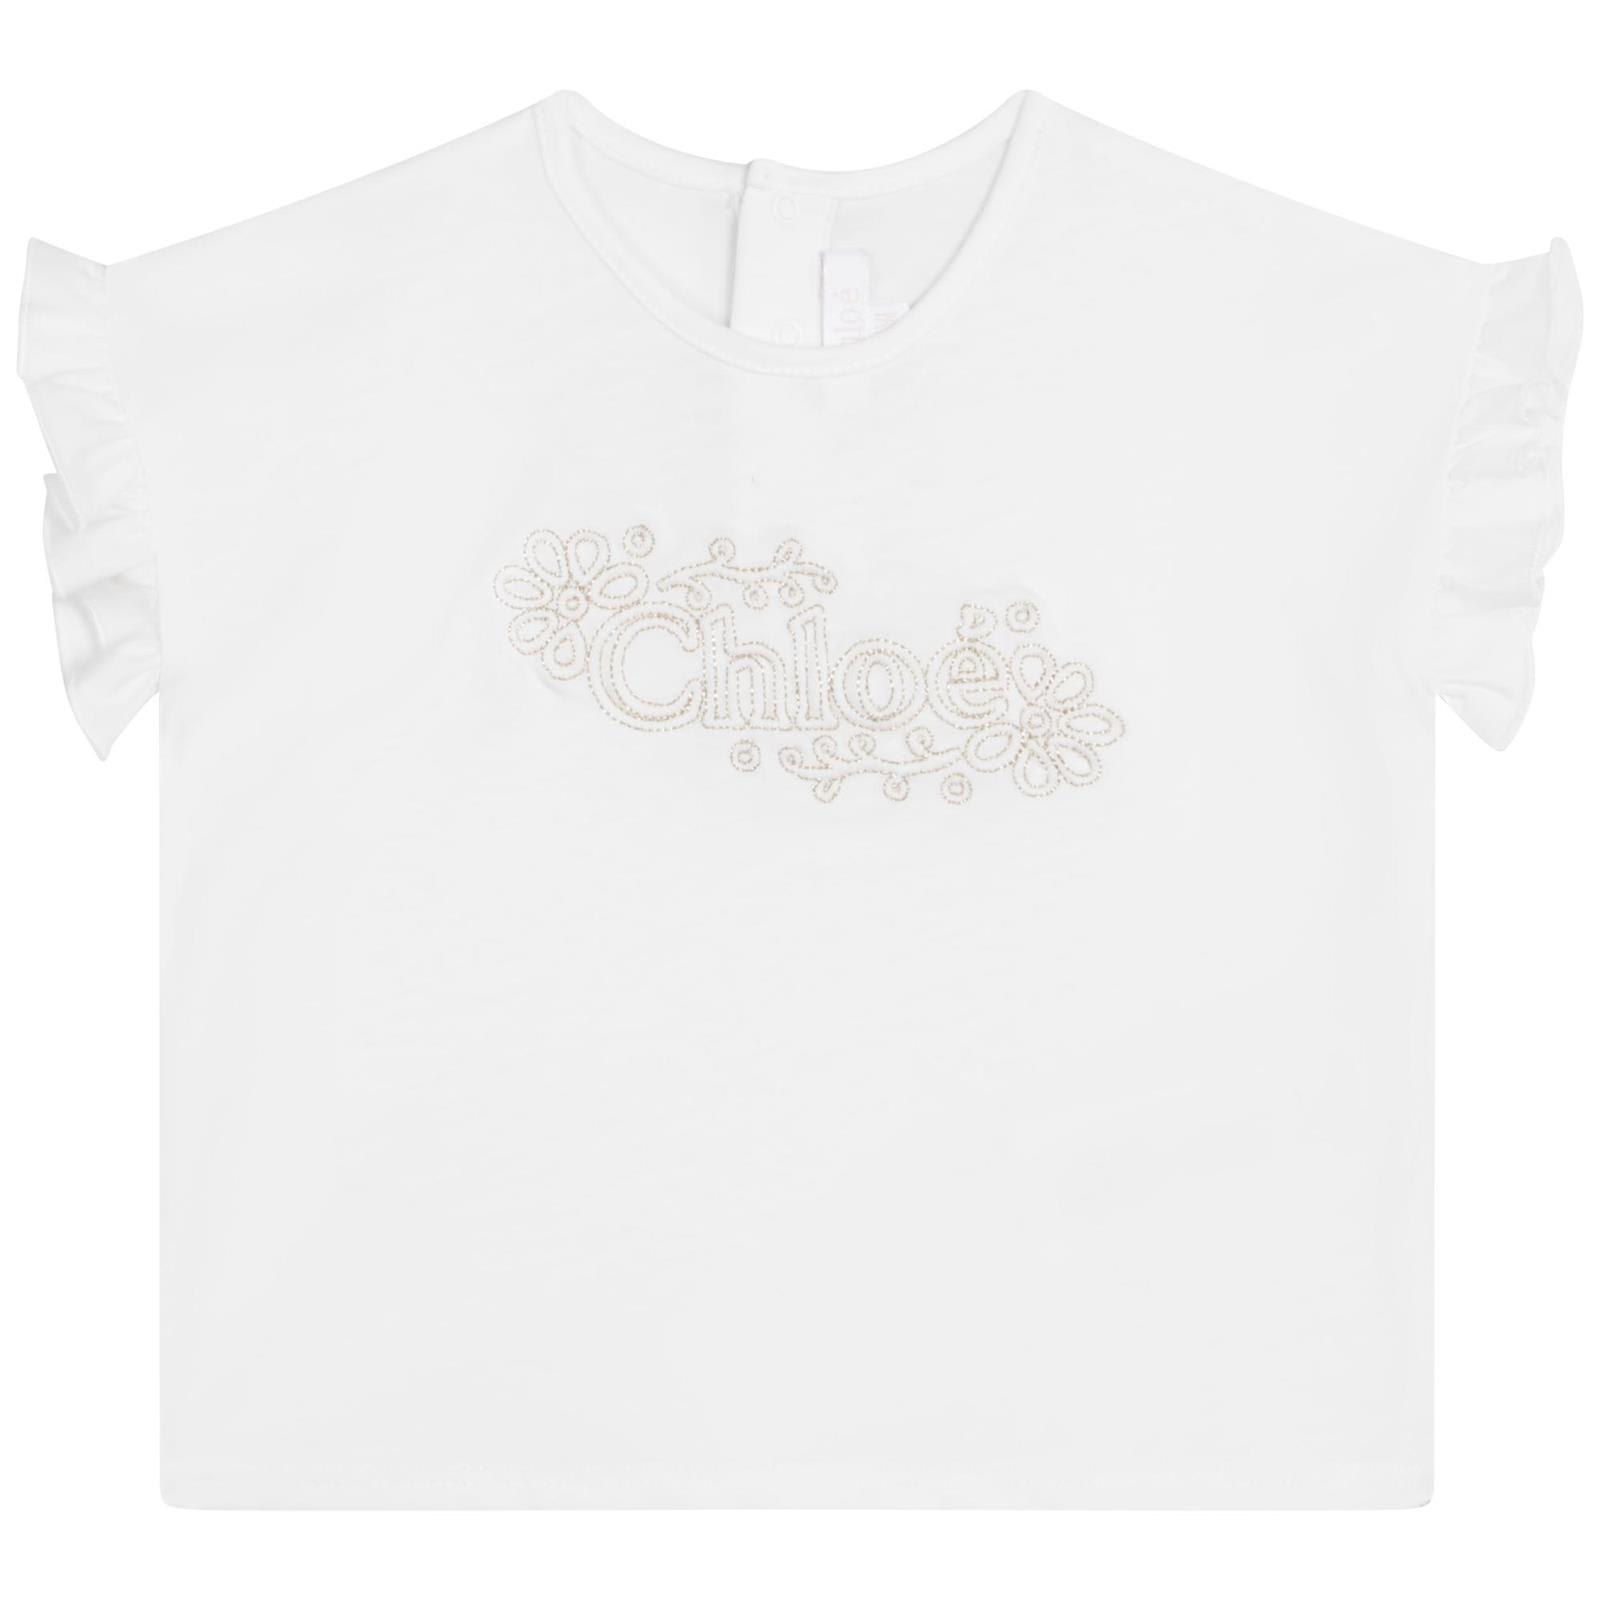 CHLOÉ SHORT-SLEEVED T-SHIRT WITH EMBROIDERED LOGO